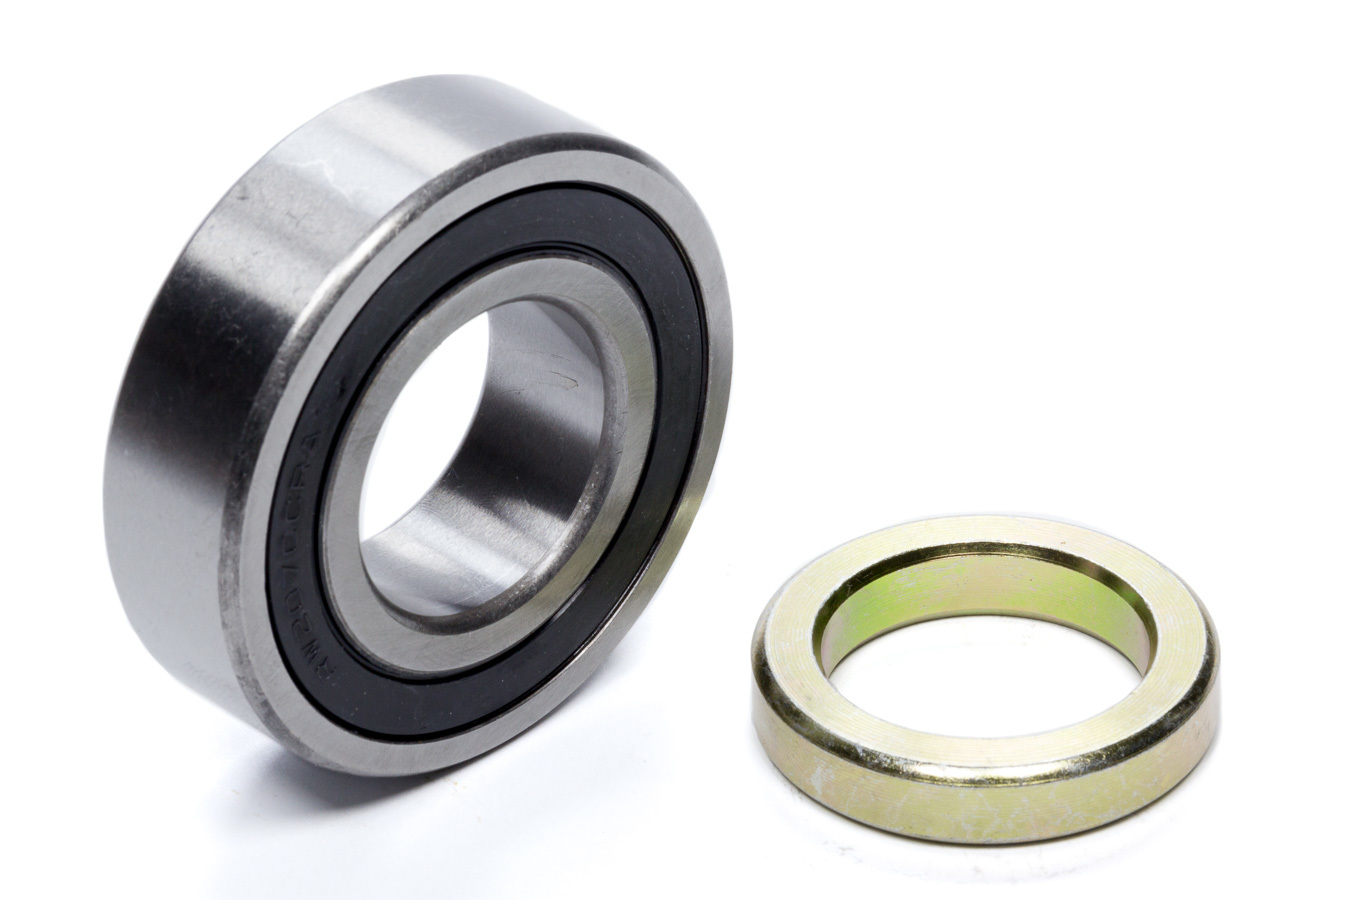 Ratech 9103 Axle Bearing, 2.834 in OD, 1.378 in ID, Ford 9 in, Each